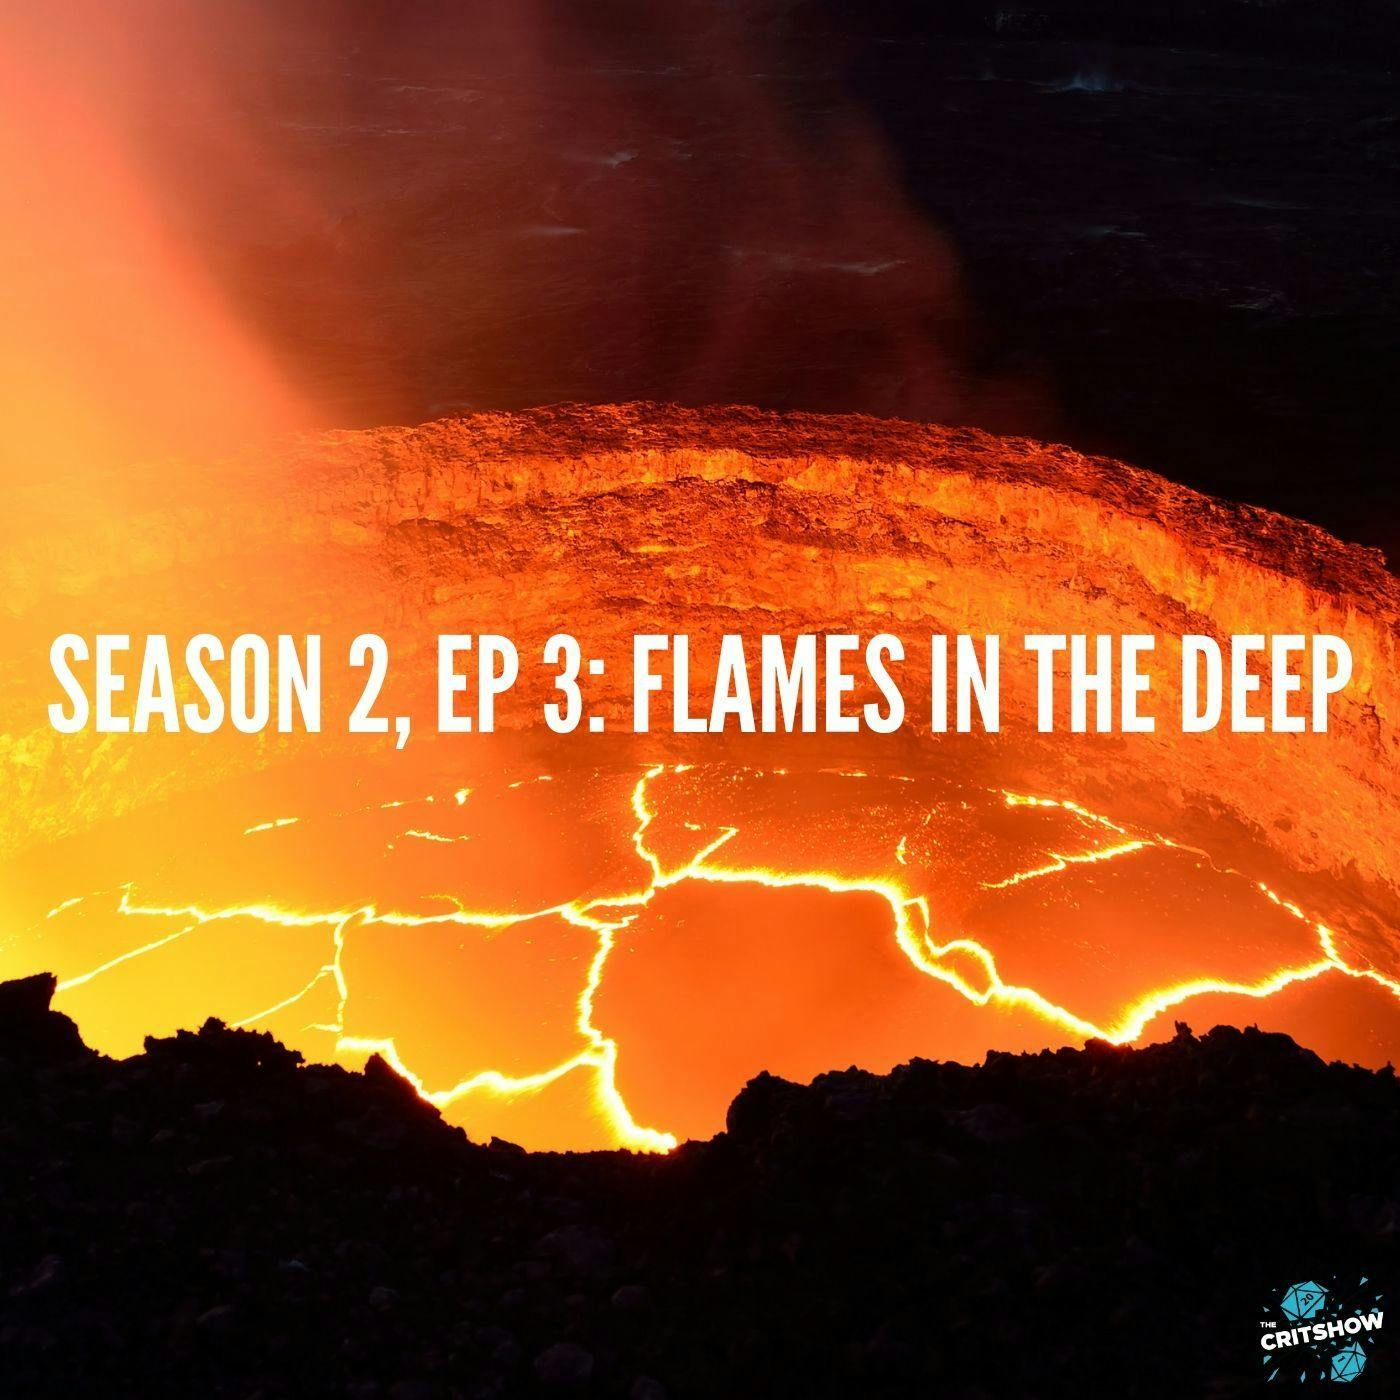 Flames in the Deep (S2, E3)